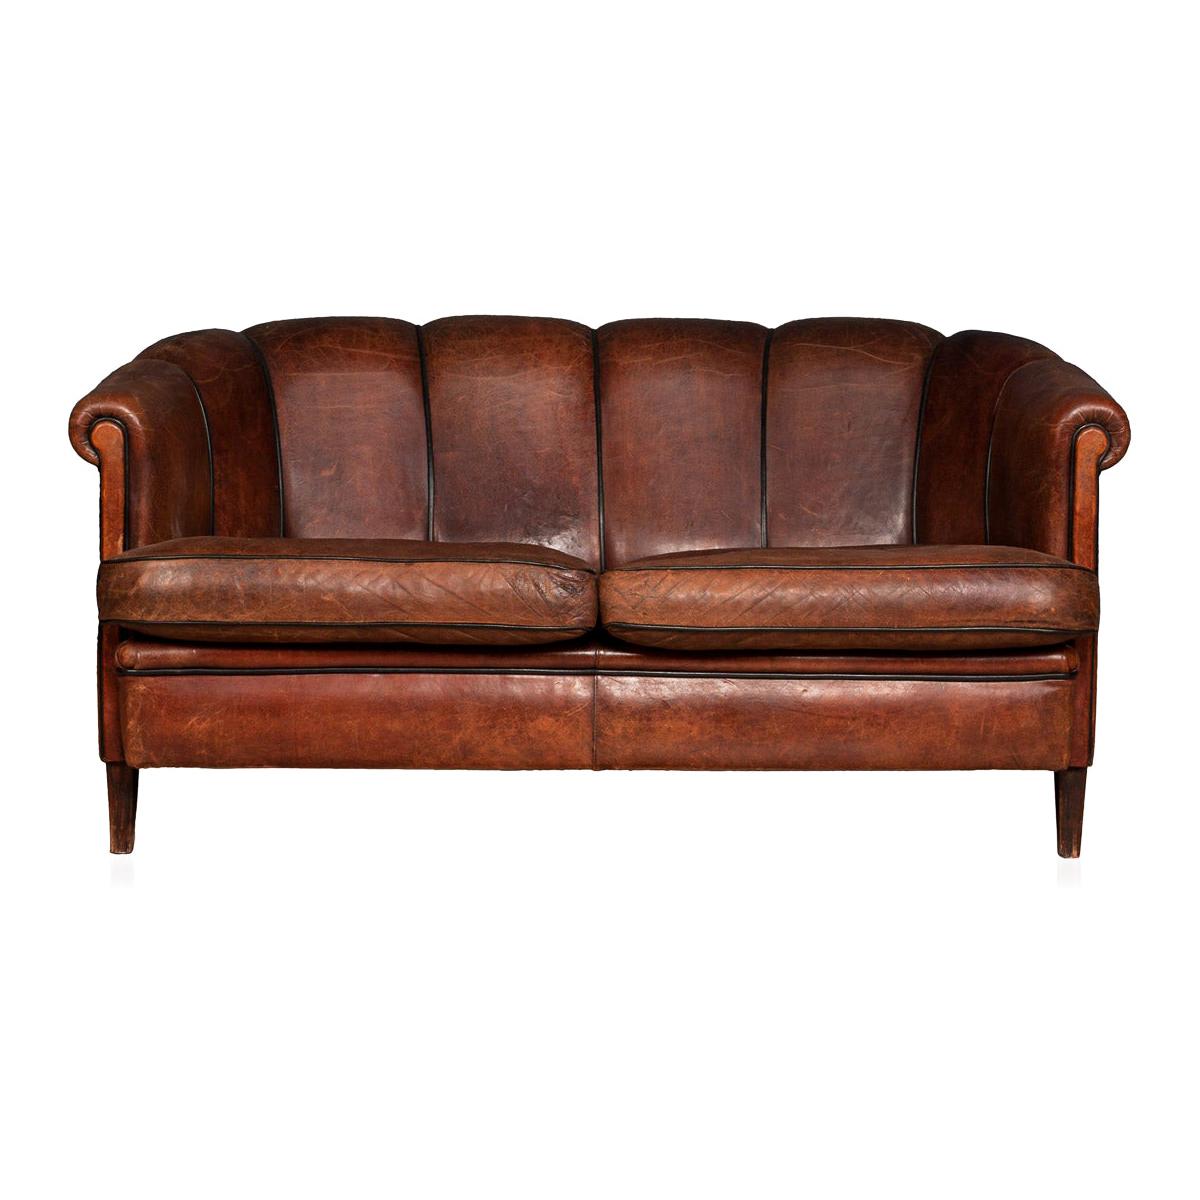 Superb Late 20th Century Scallop Back Two-Seat Sofa in Sheepskin Leather Sofa